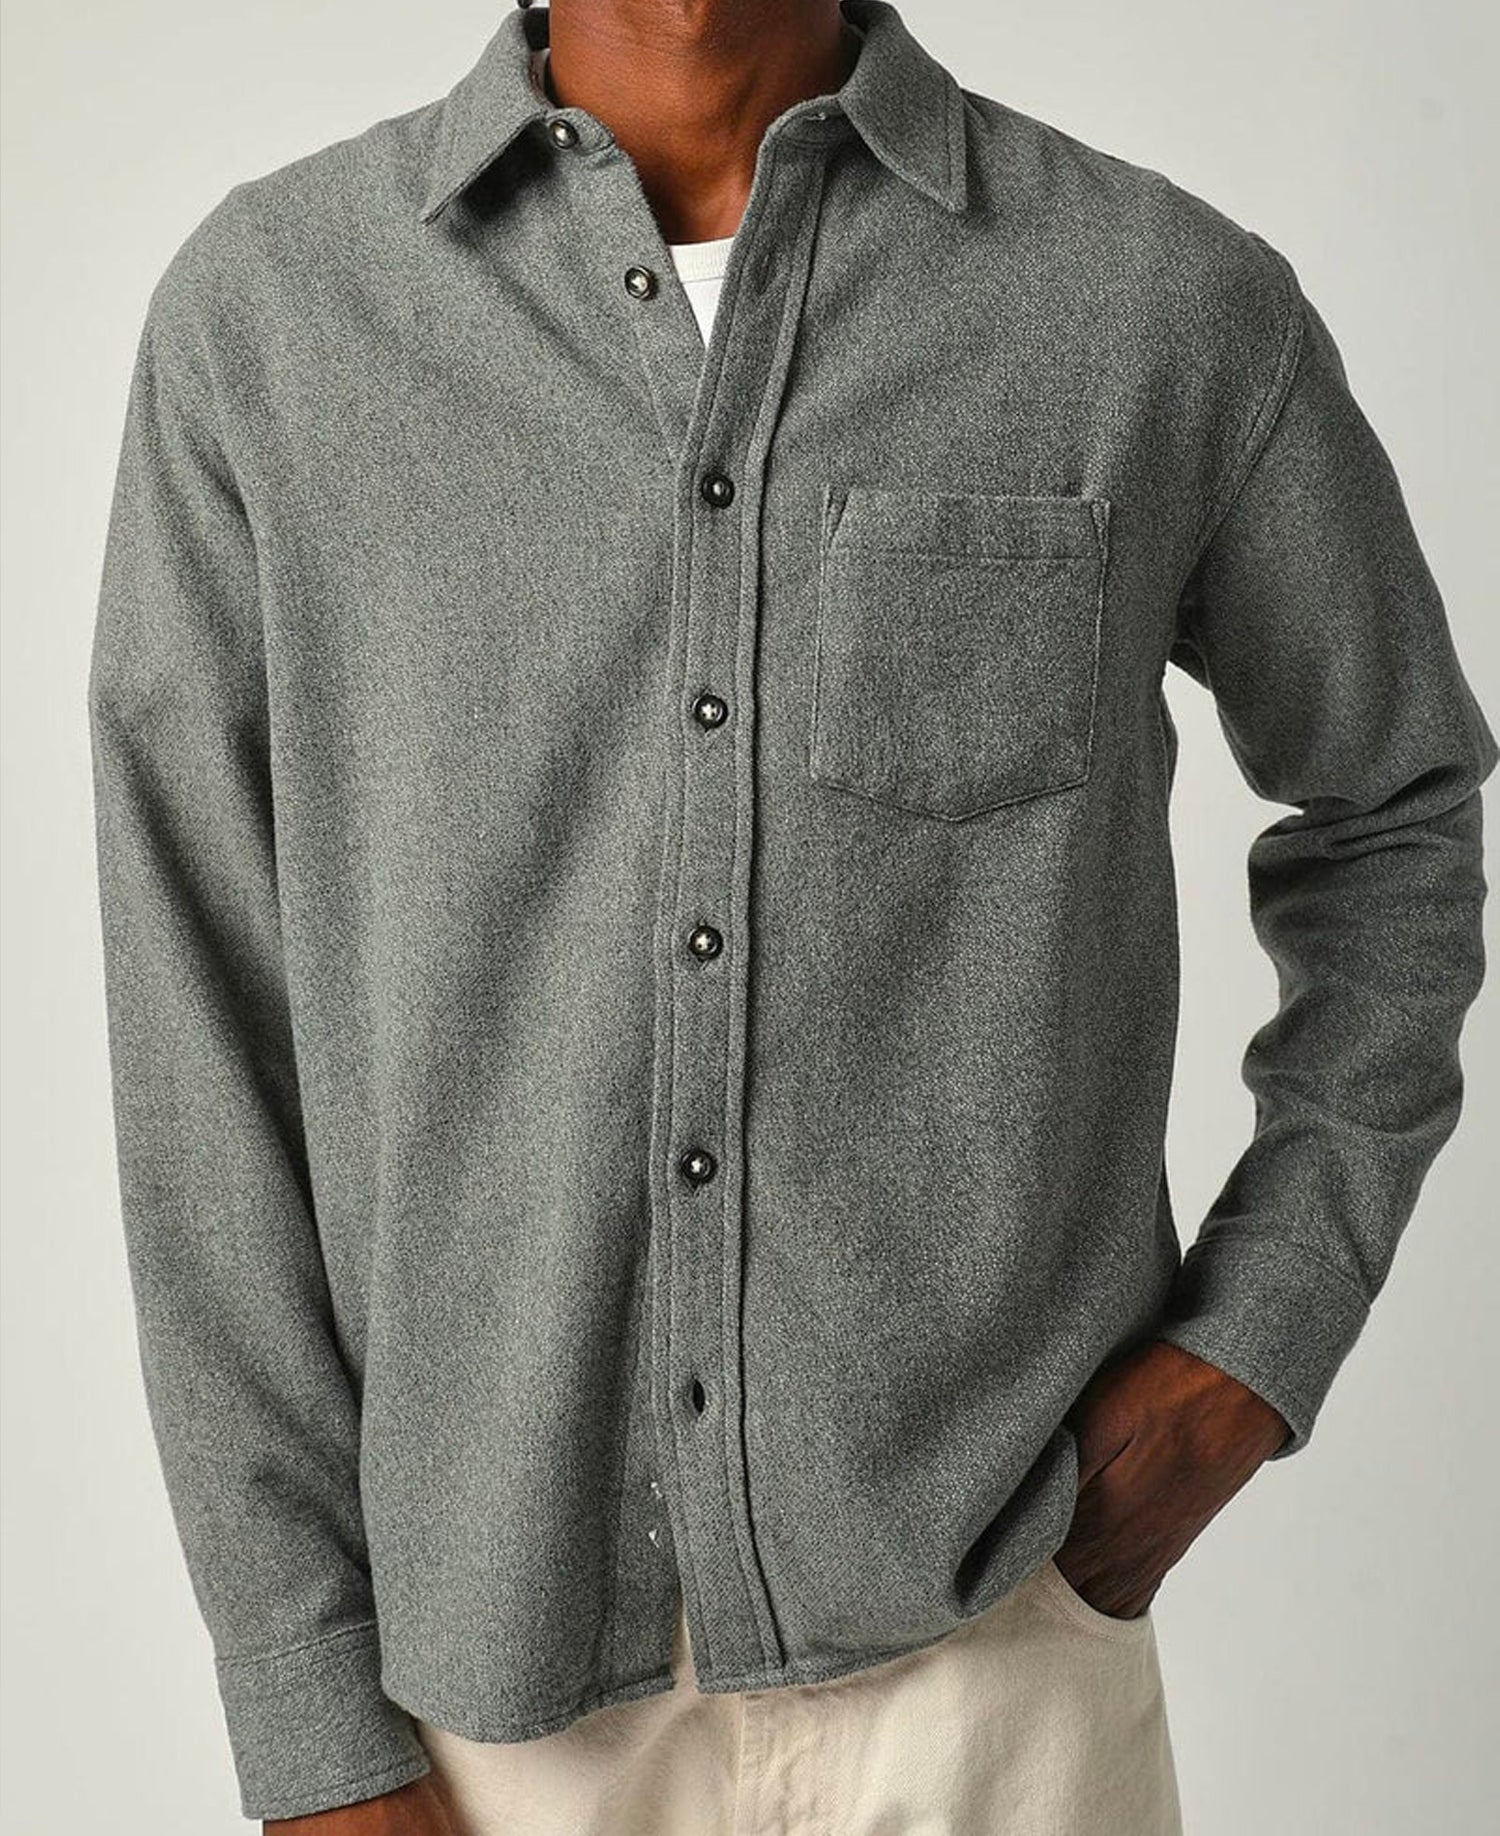 Recycled Flannel LS GREY

100% Recycled Cotton
Regular fit
Made in India 
LS0133-GRY
 CORRIDOR